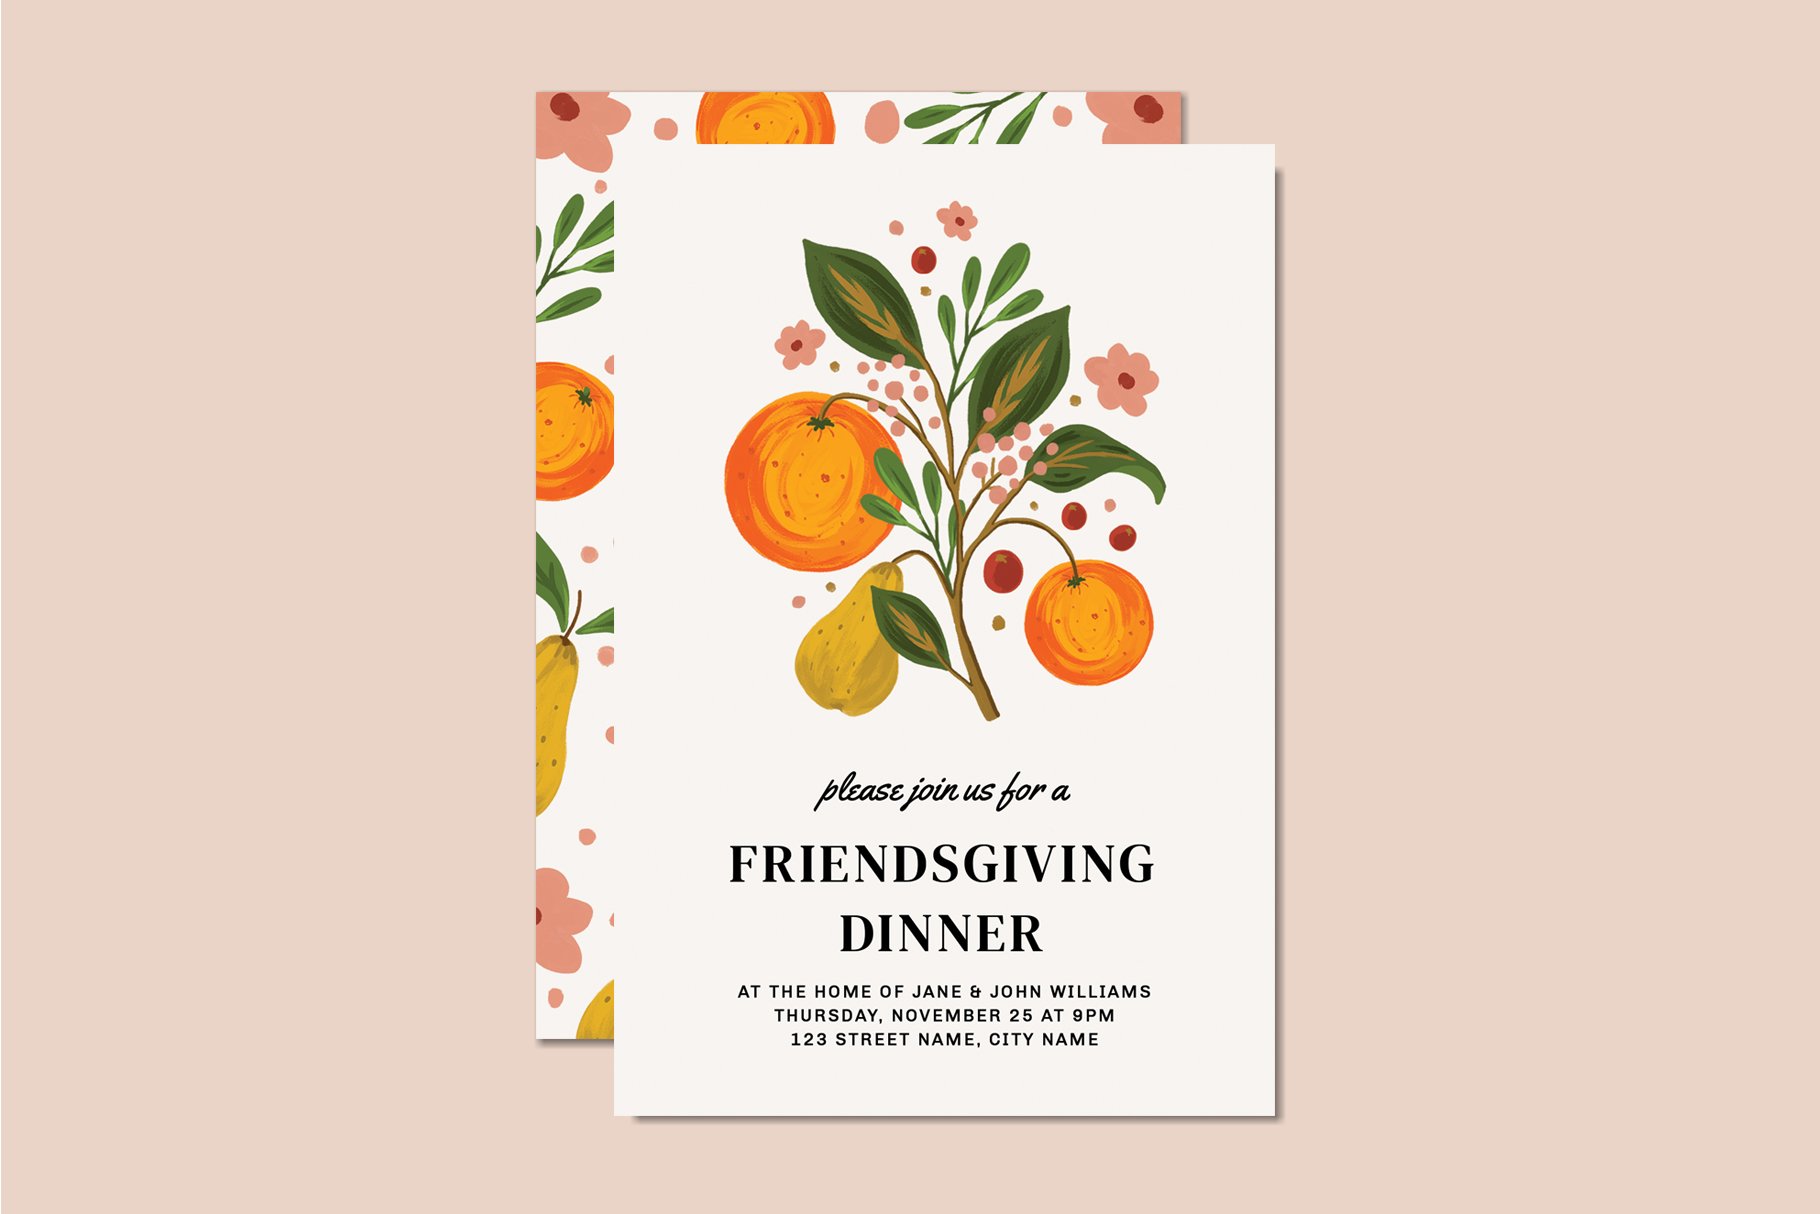 Thanksgiving Invitation Template cover image.